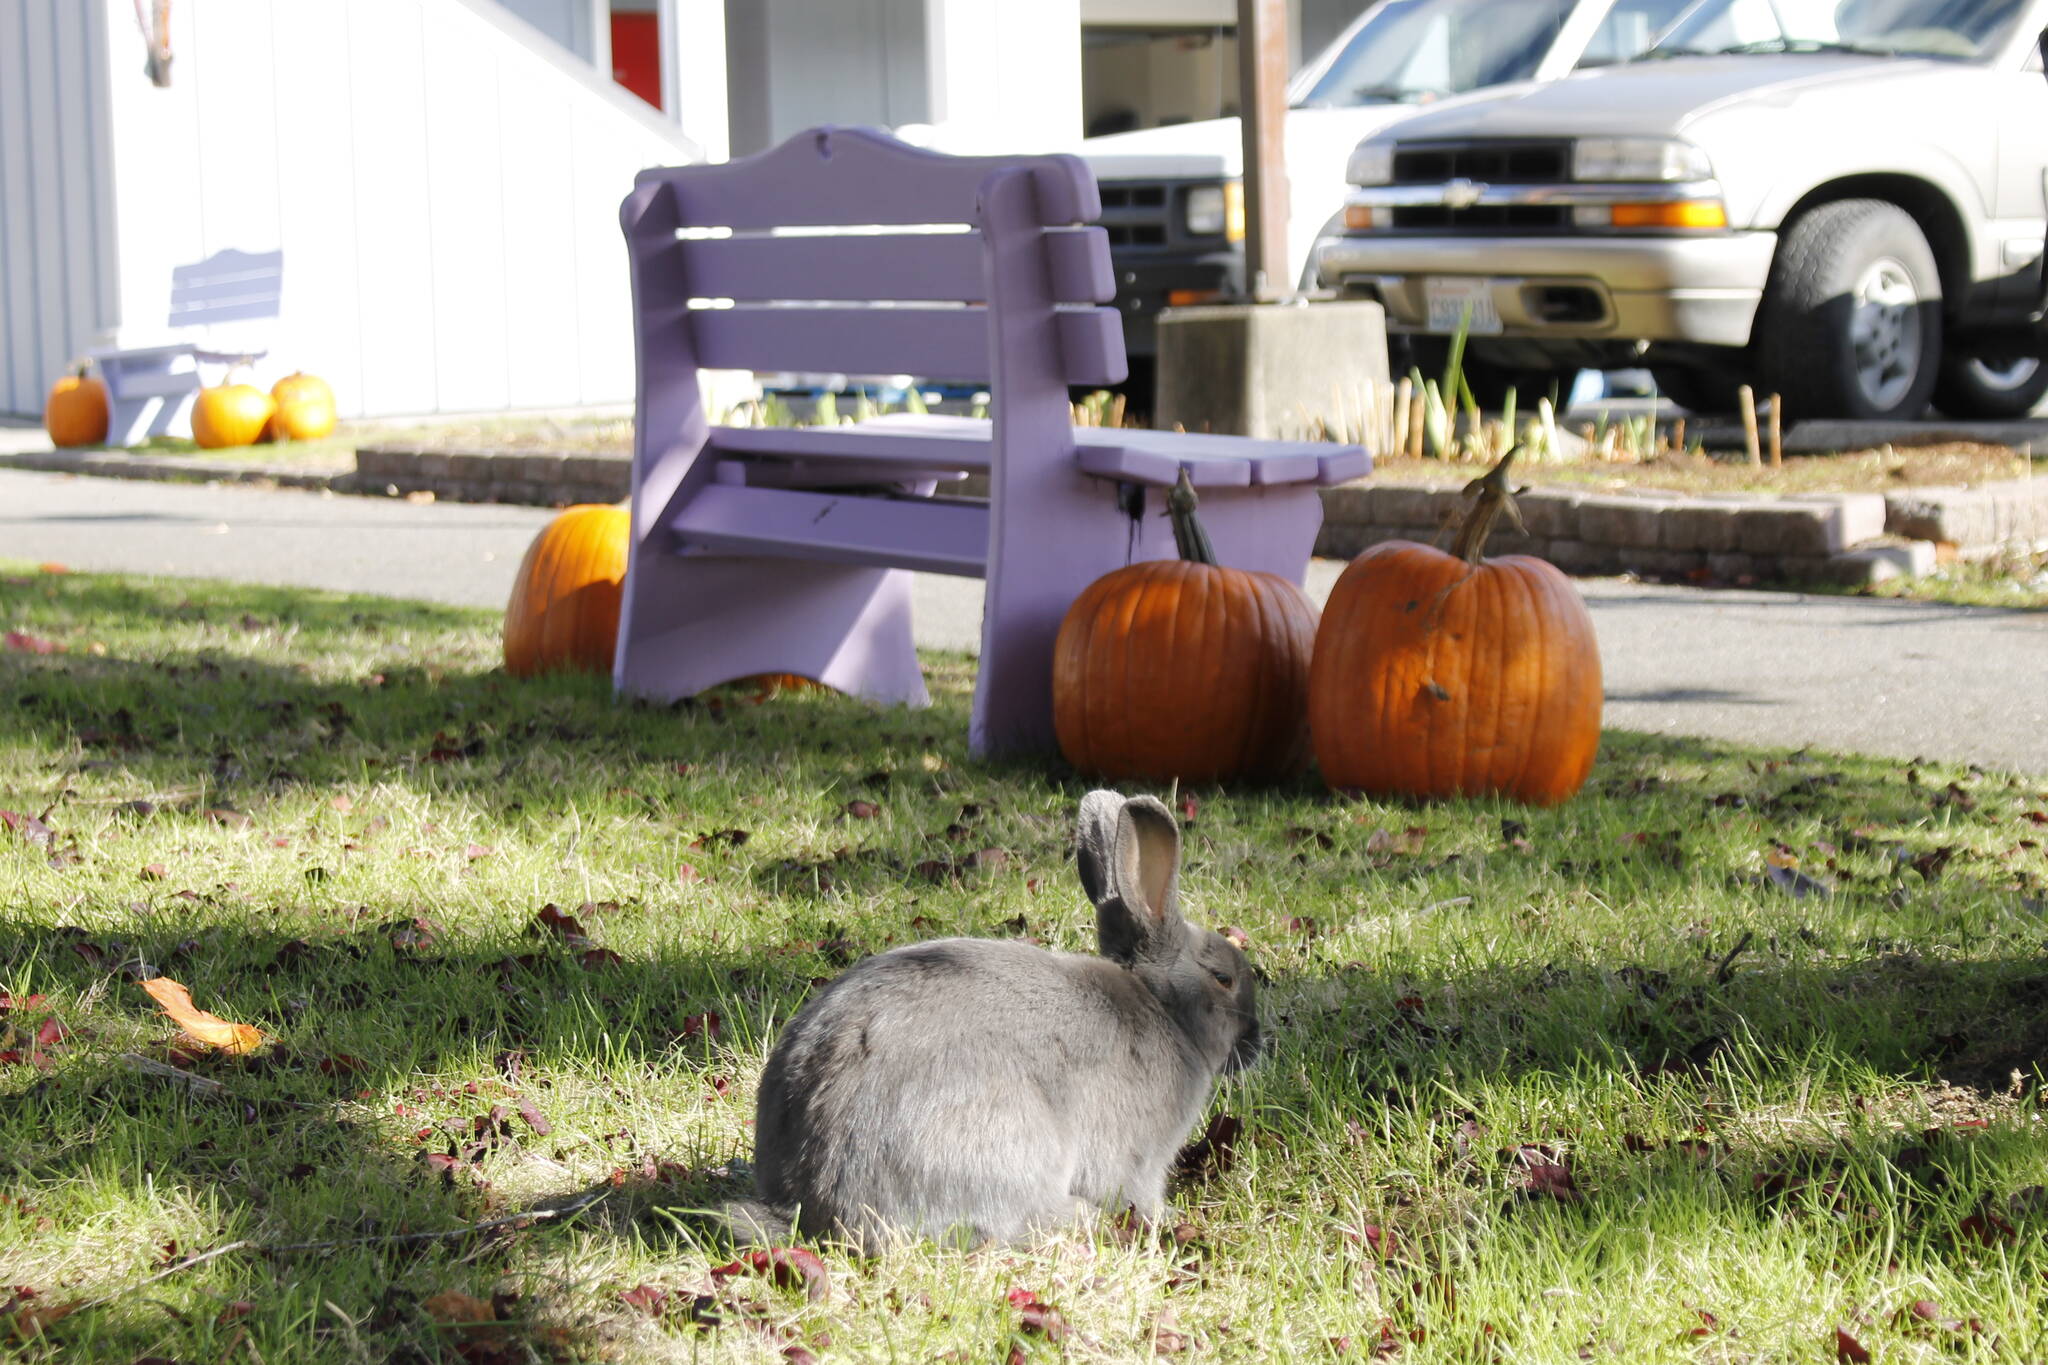 Photo by Kira Erickson/South Whidbey Record
A Langley rabbit munches on some fallen leaves near a bunch of pumpkins.